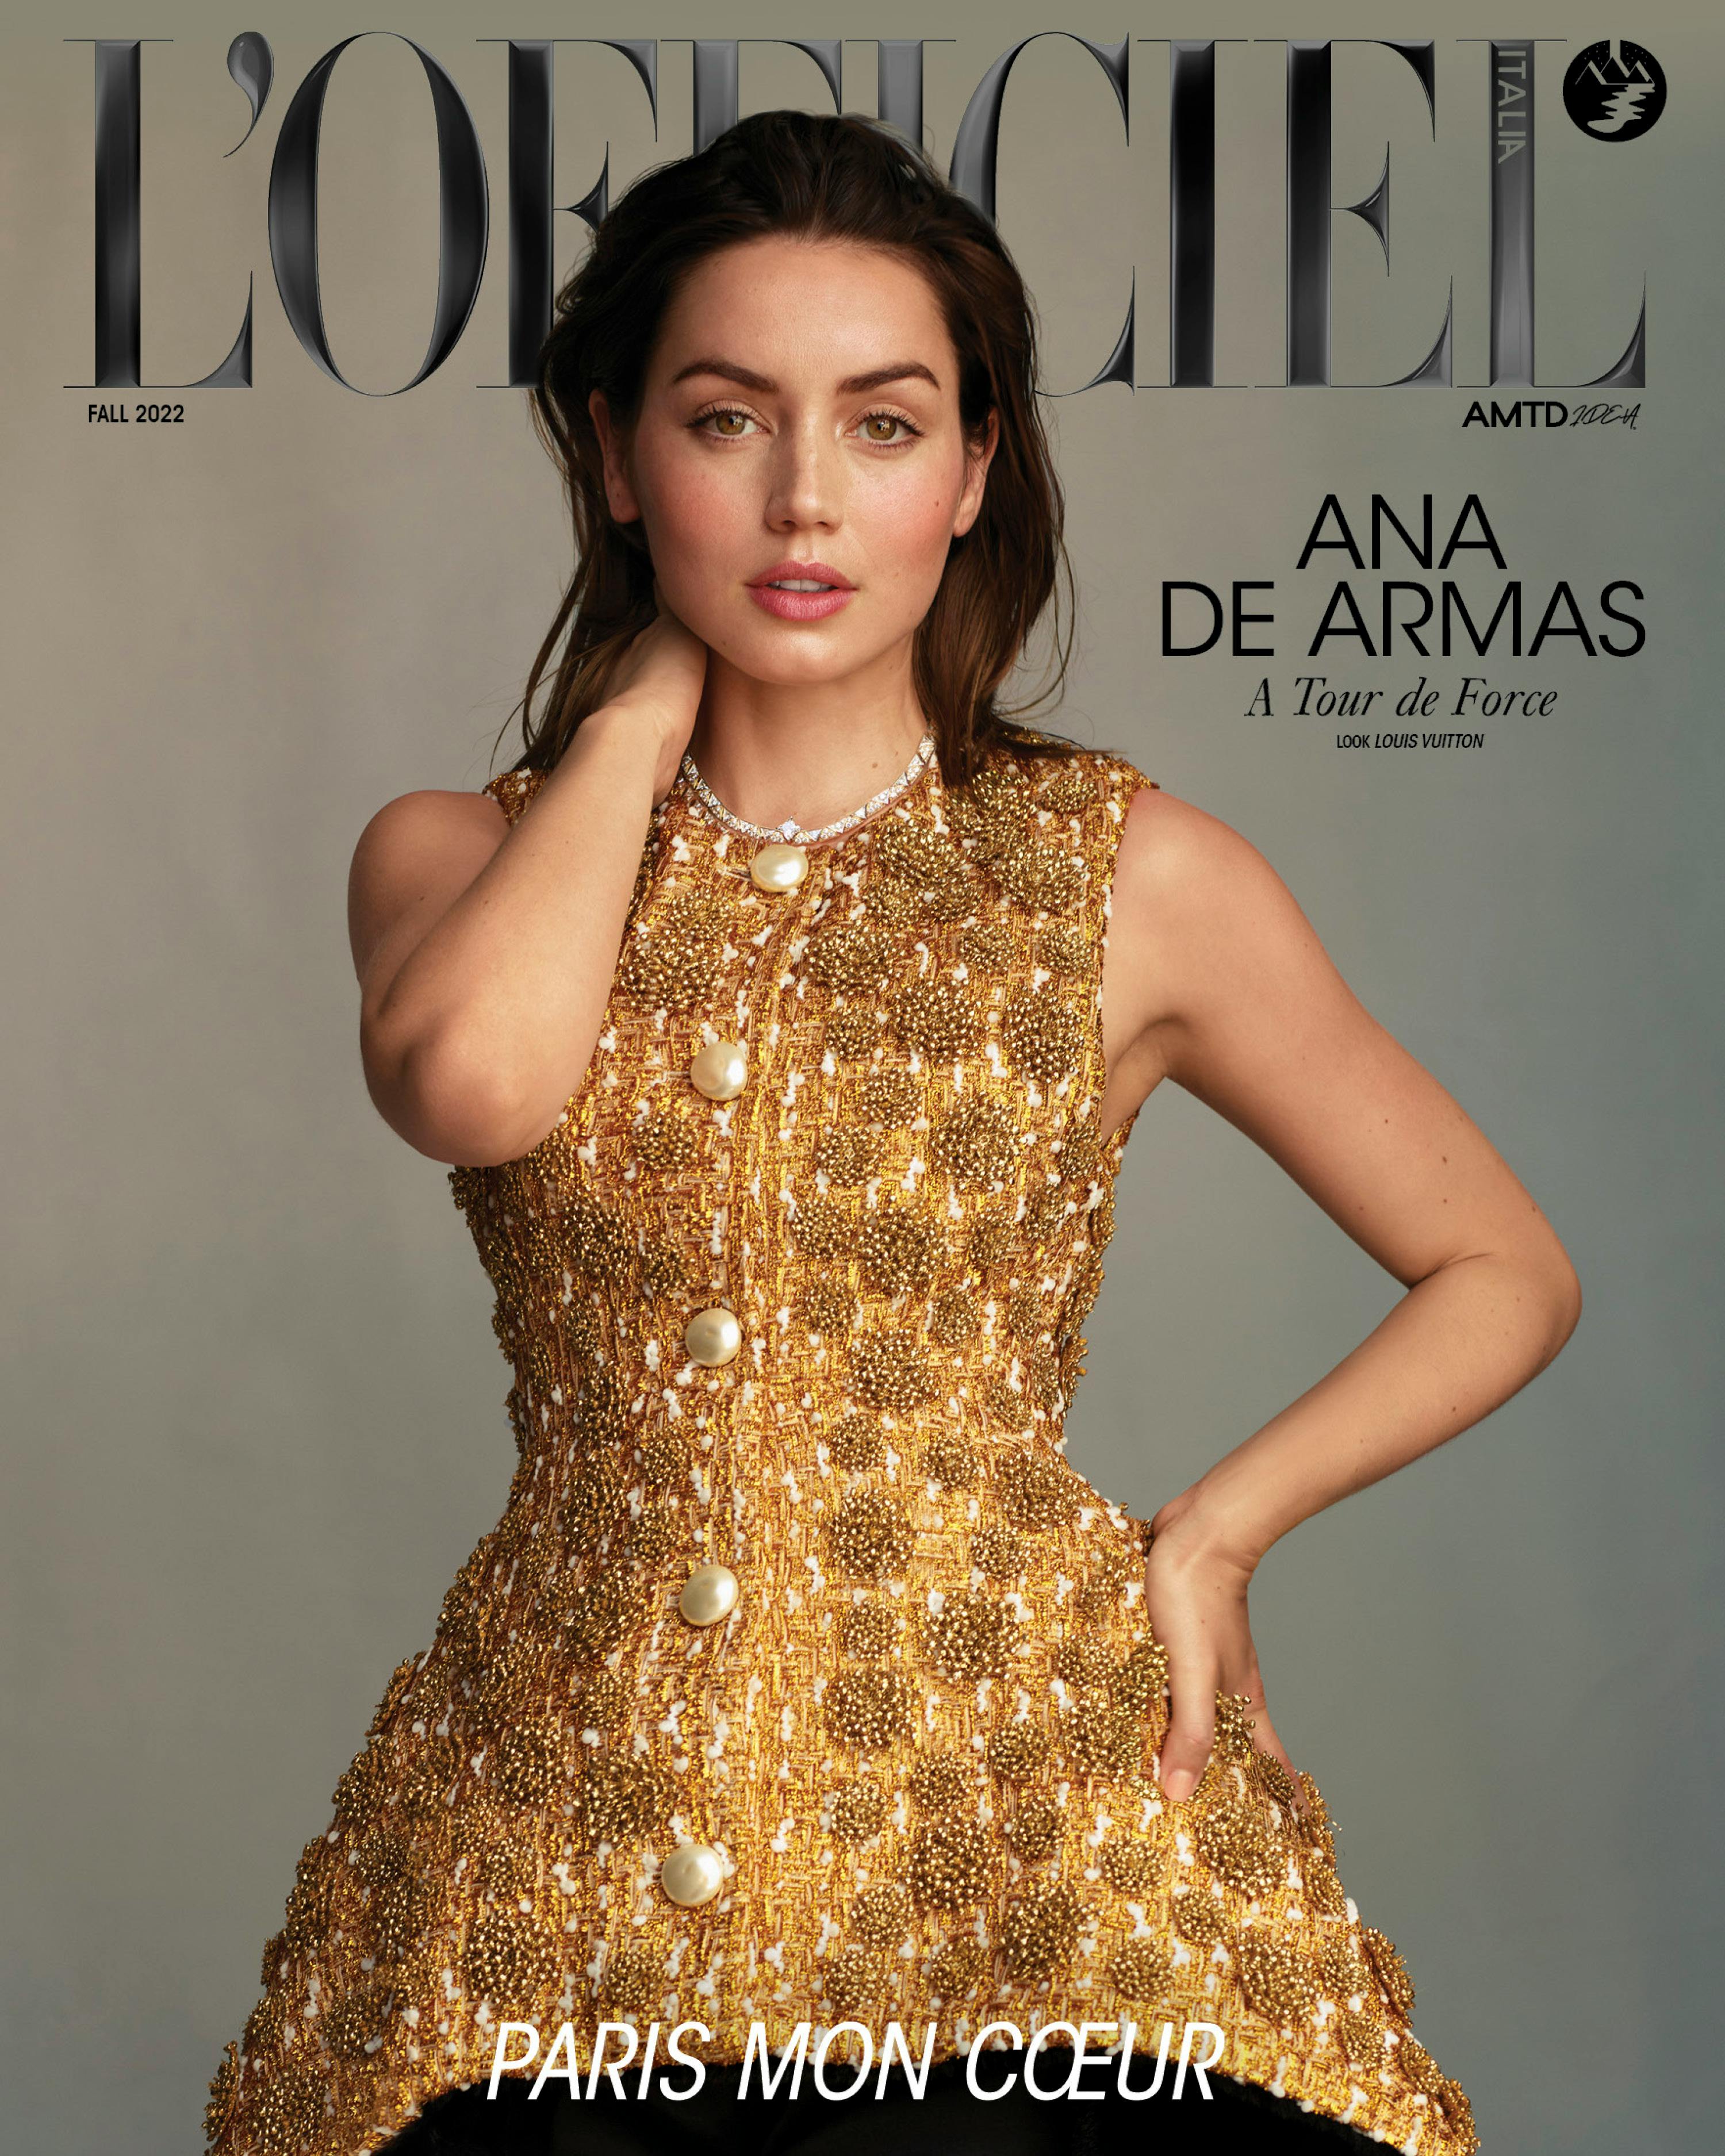 Ana de Armas tells about life in the spotlight and the film Blonde